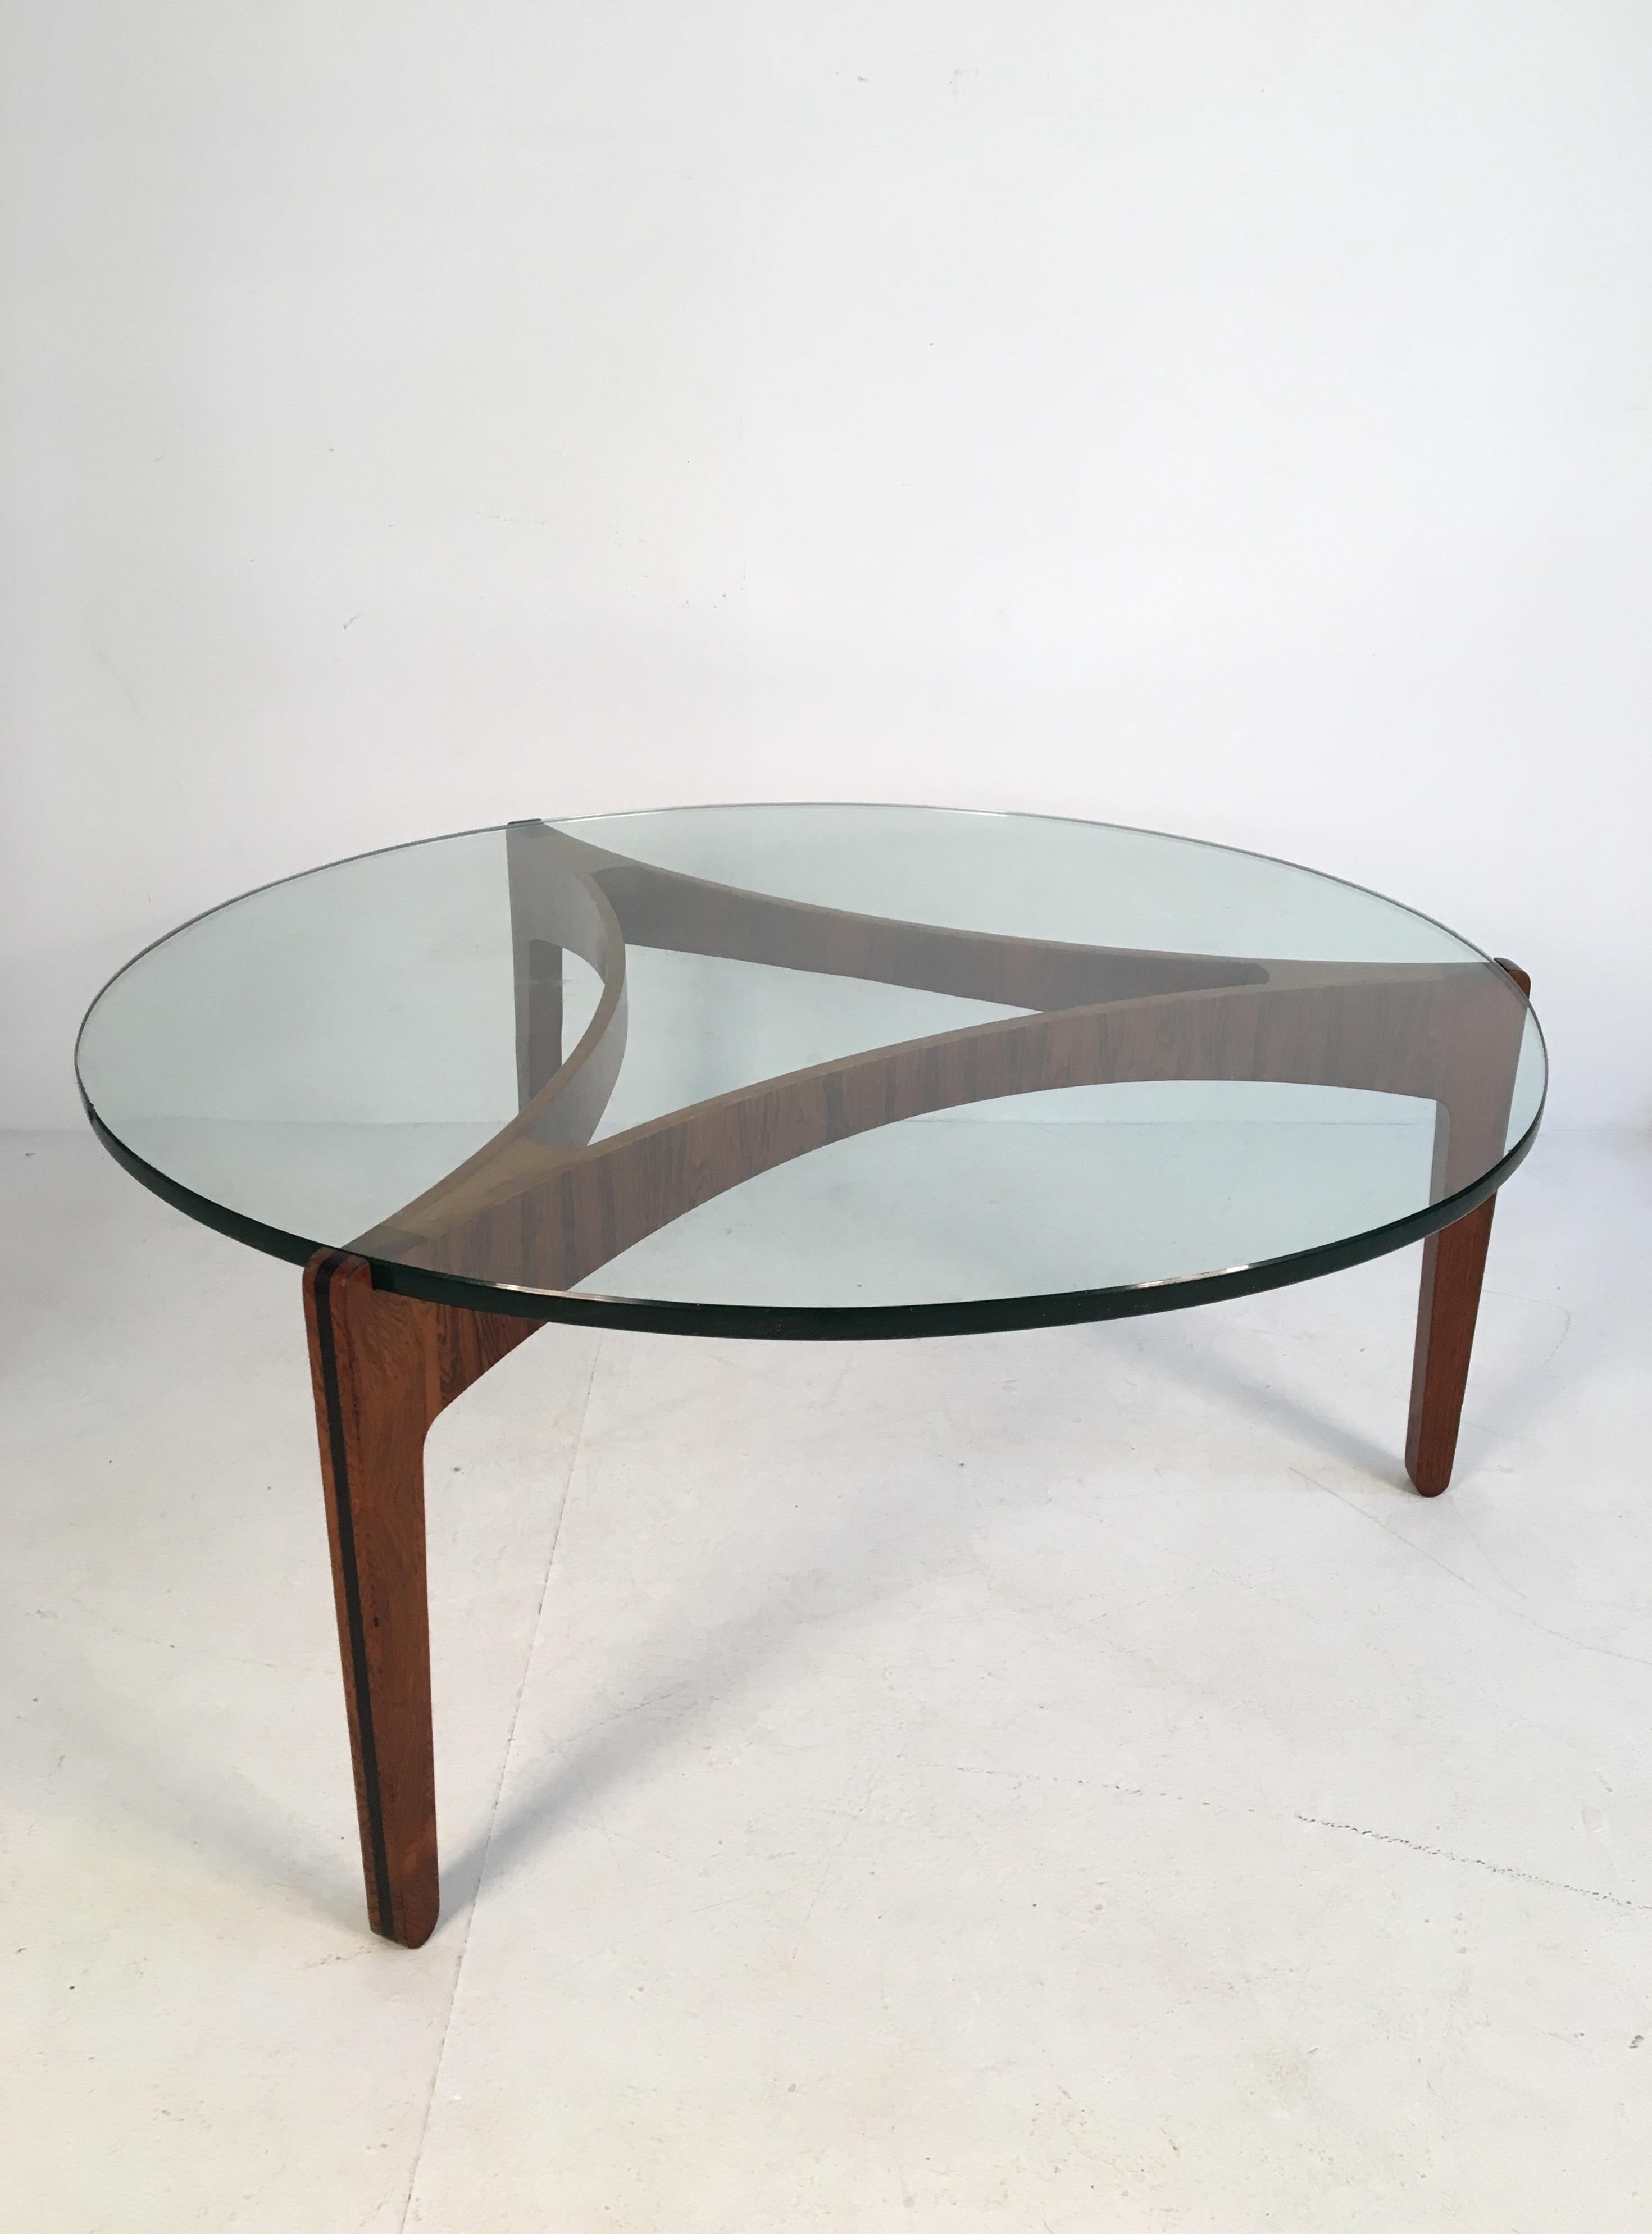 Exquisite coffee table designed by Sven Ellekaer for Christian Linneberg Mobelfabrik, Denmark in 1962. This elegant piece is composed of a beautiful bent rosewood base supporting a thick tempered glass table top.